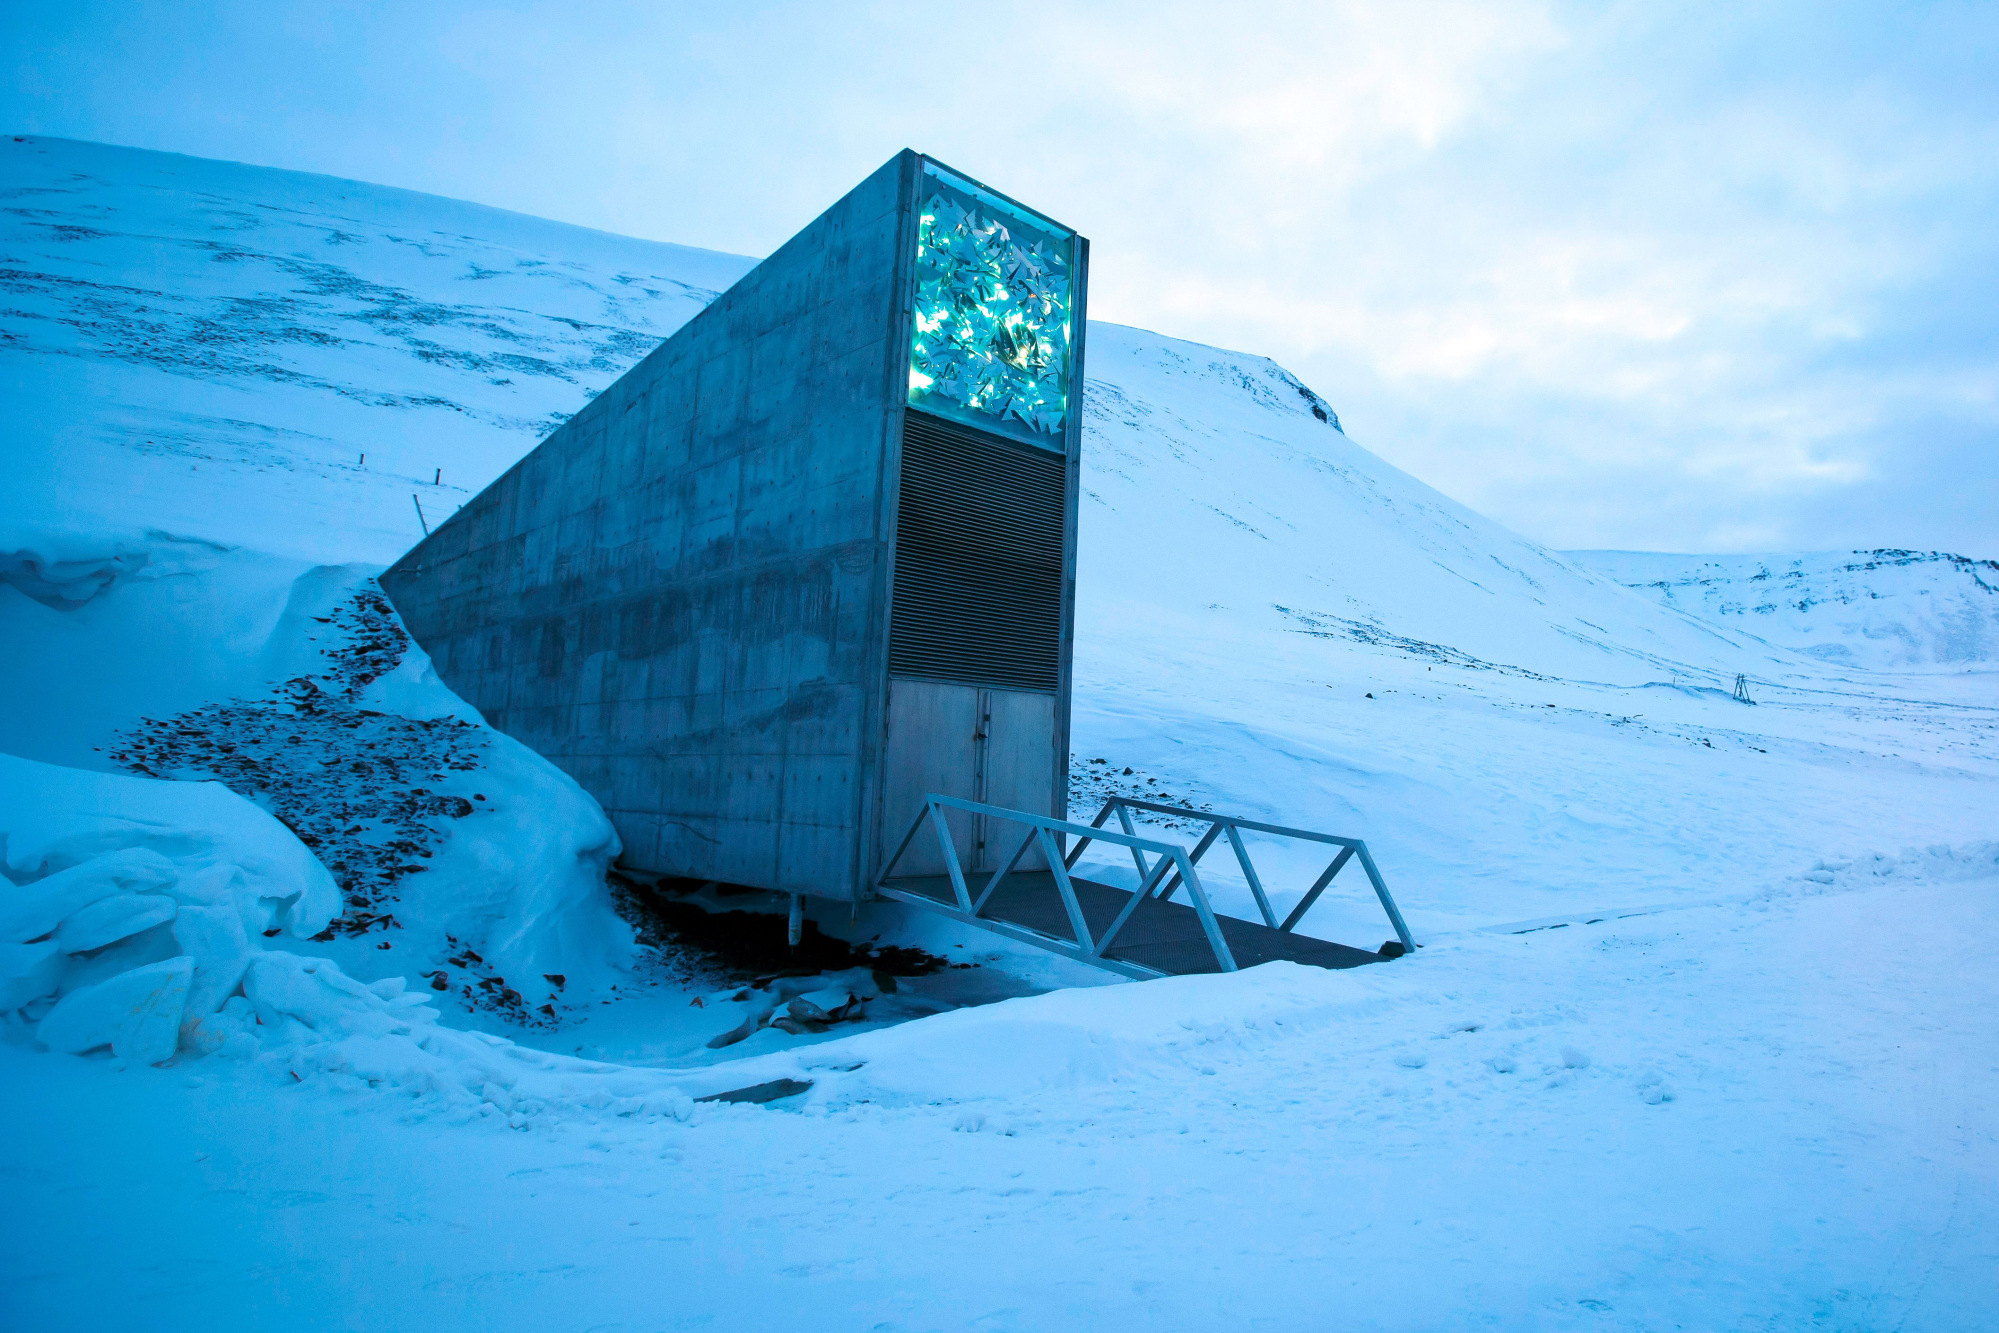 Entrance to the seed vault in Norway.